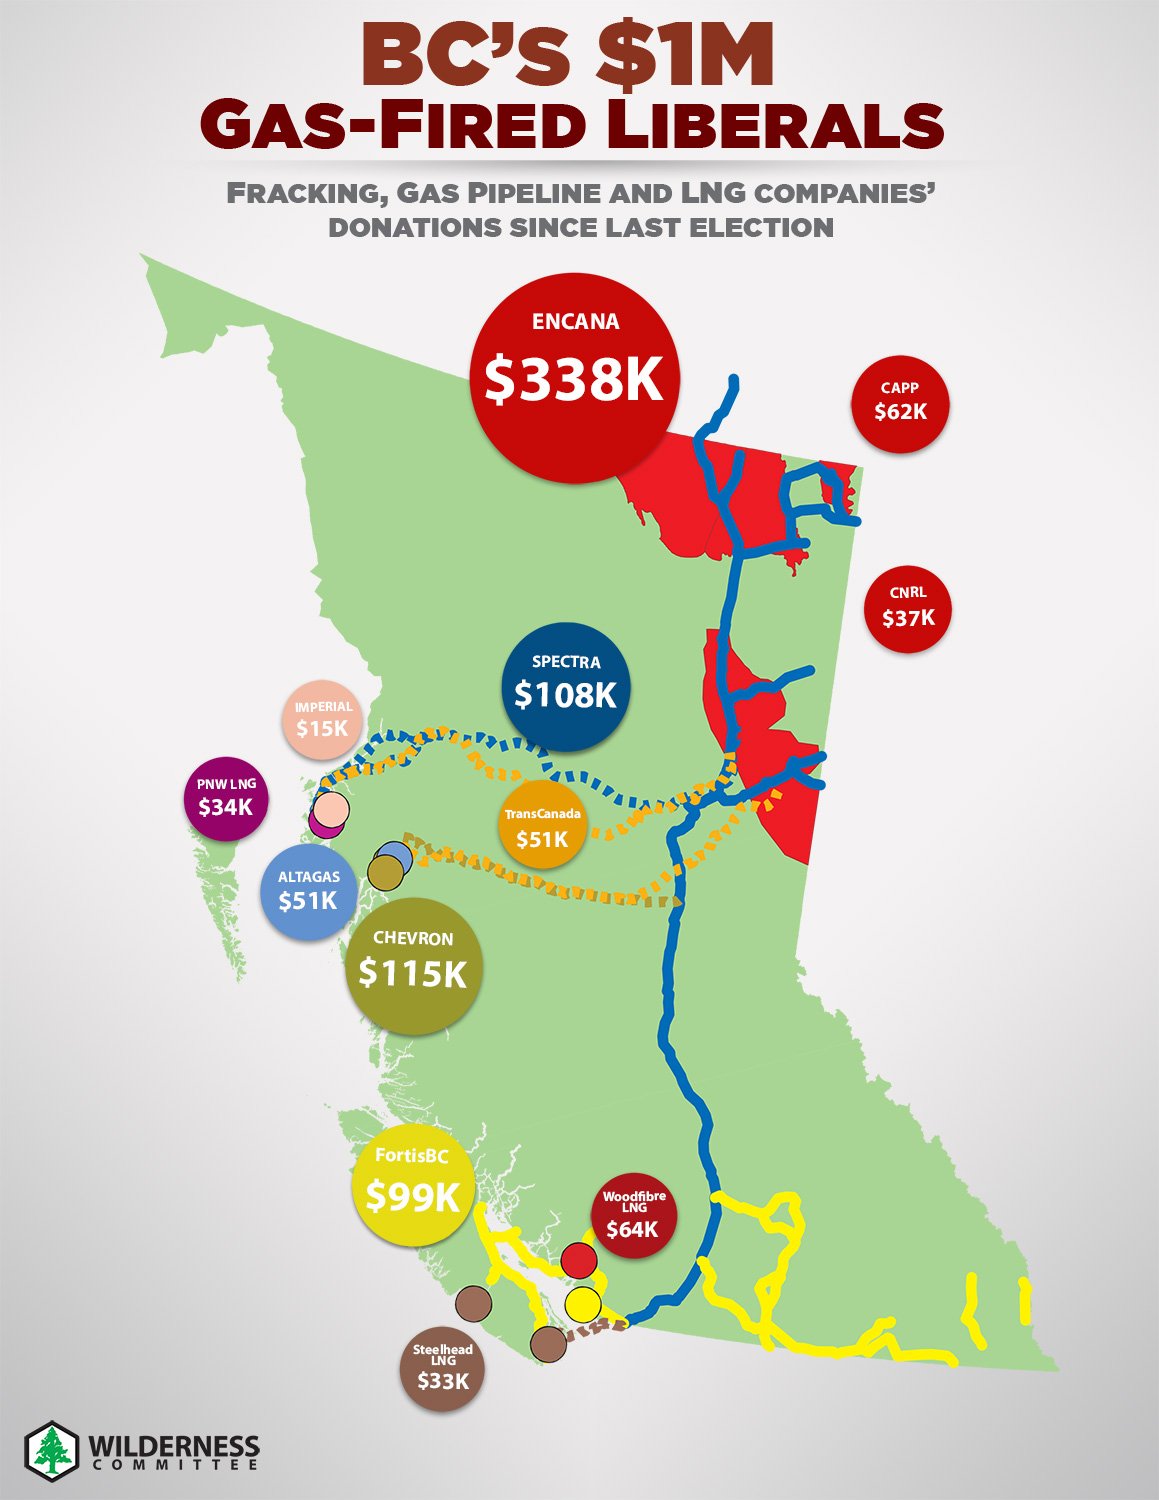 960px version of 'BC's Gas Fired Liberals' infographic